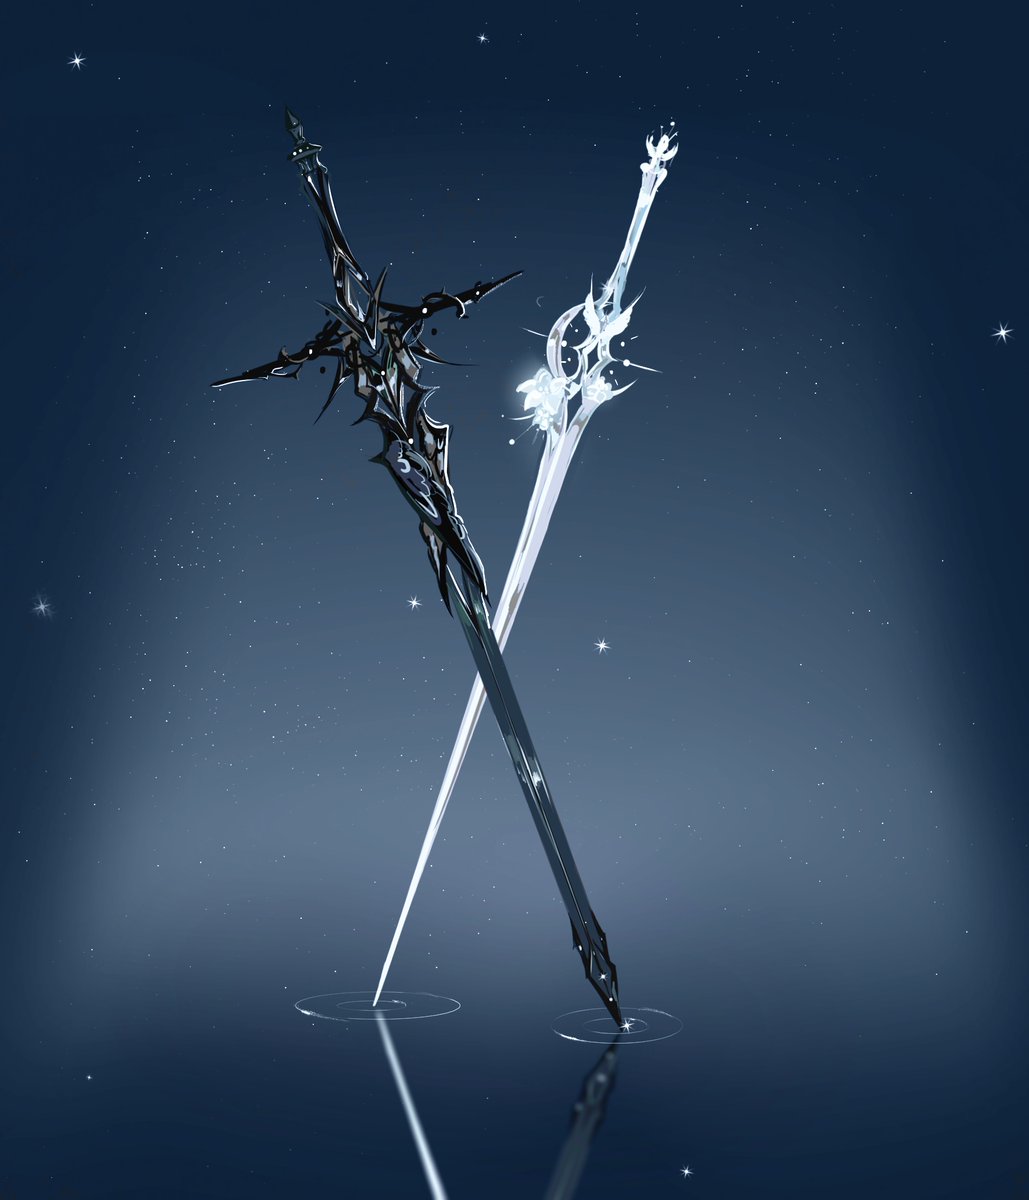 spoiler 
swords for Aether and Lumine